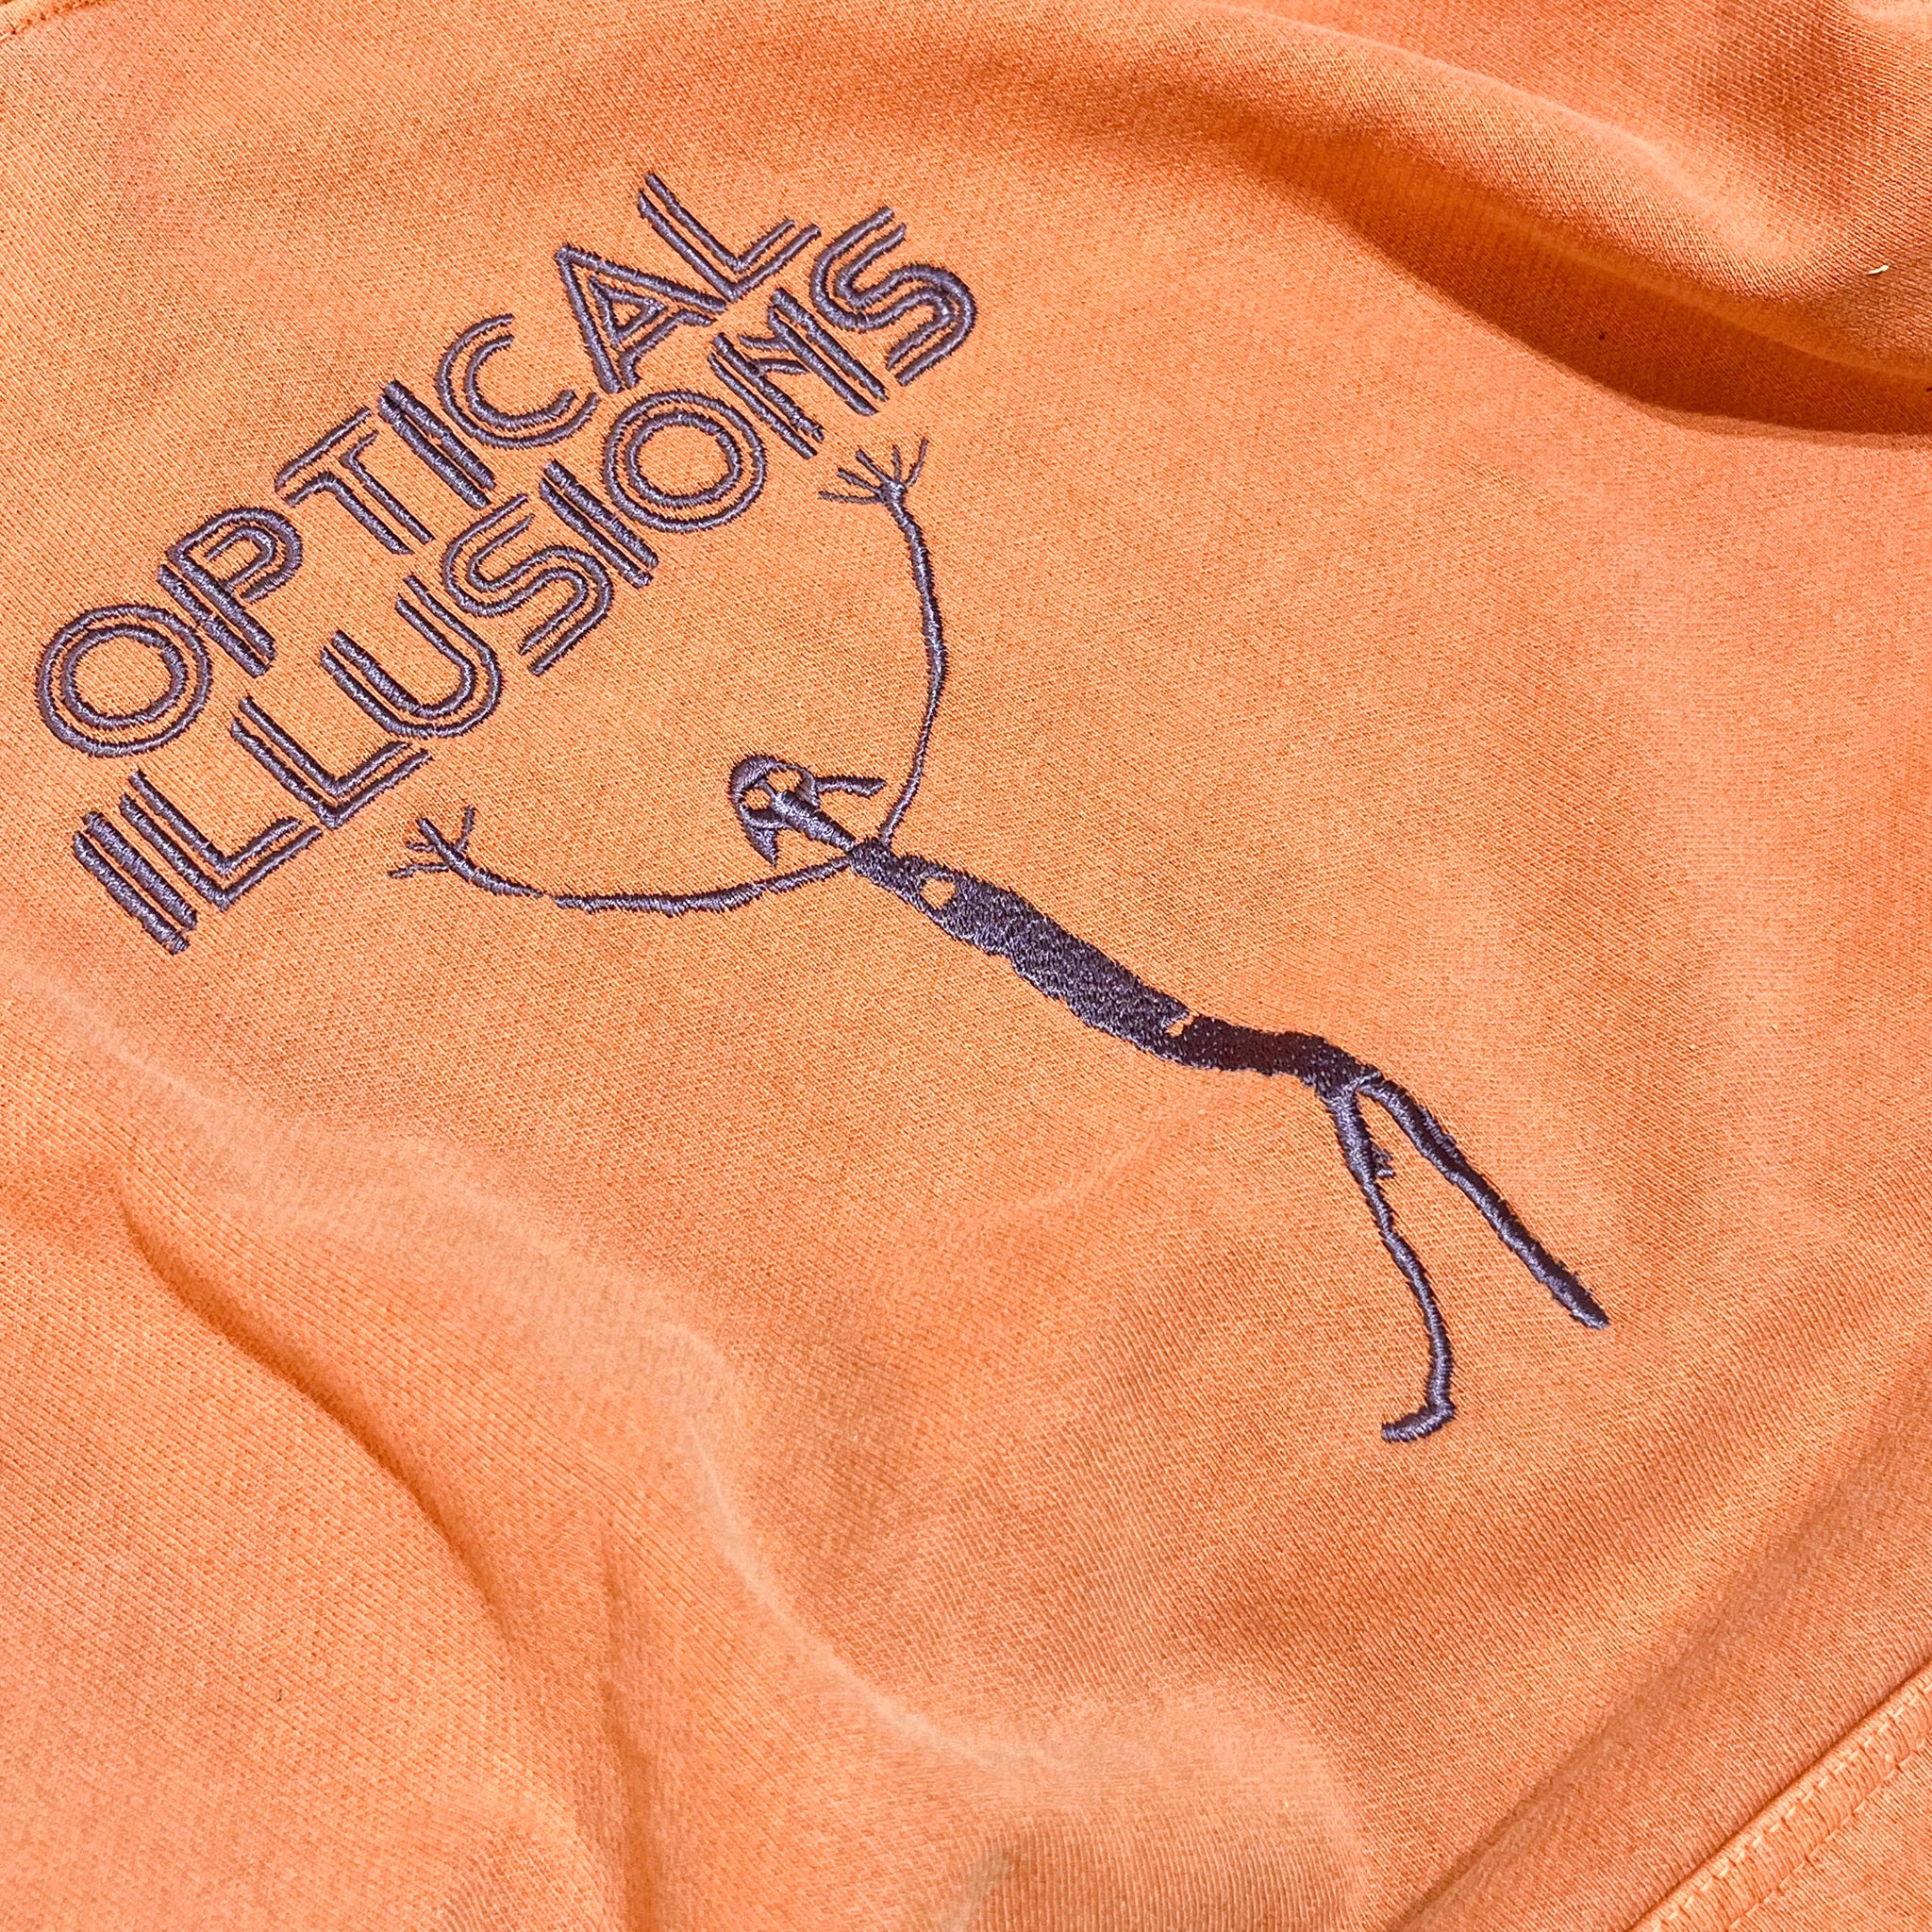 Optical Illusions Heavy Weight Hoody Marmalade